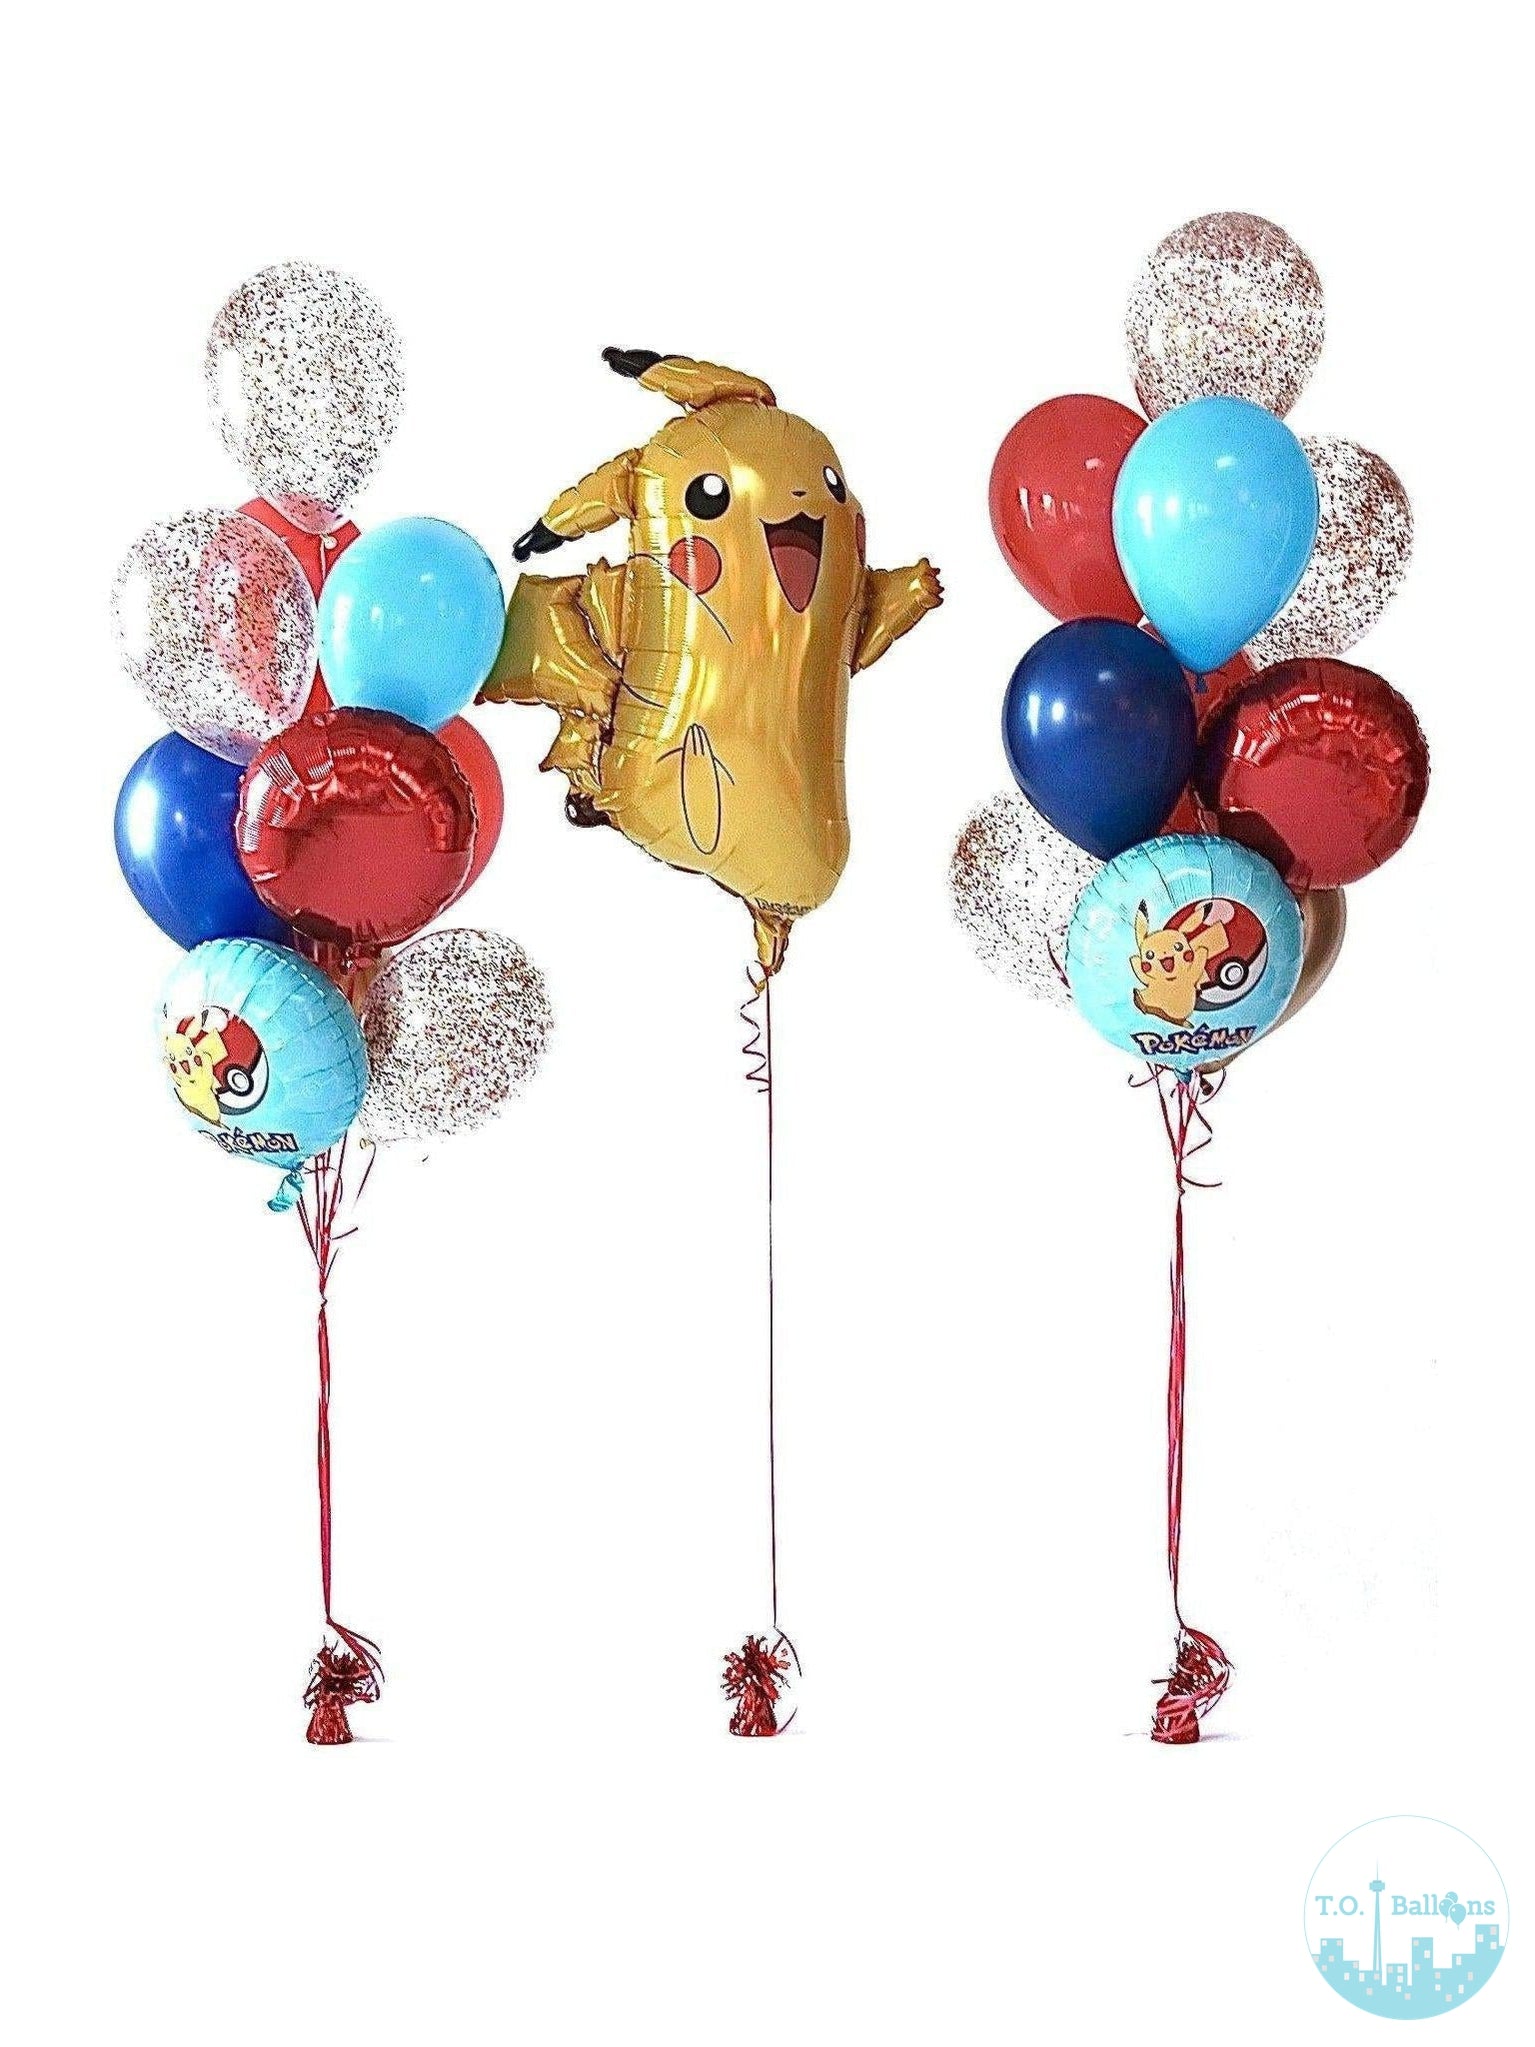 PIKACHU POKEMON PARTY PACKAGE T.O. Balloons 